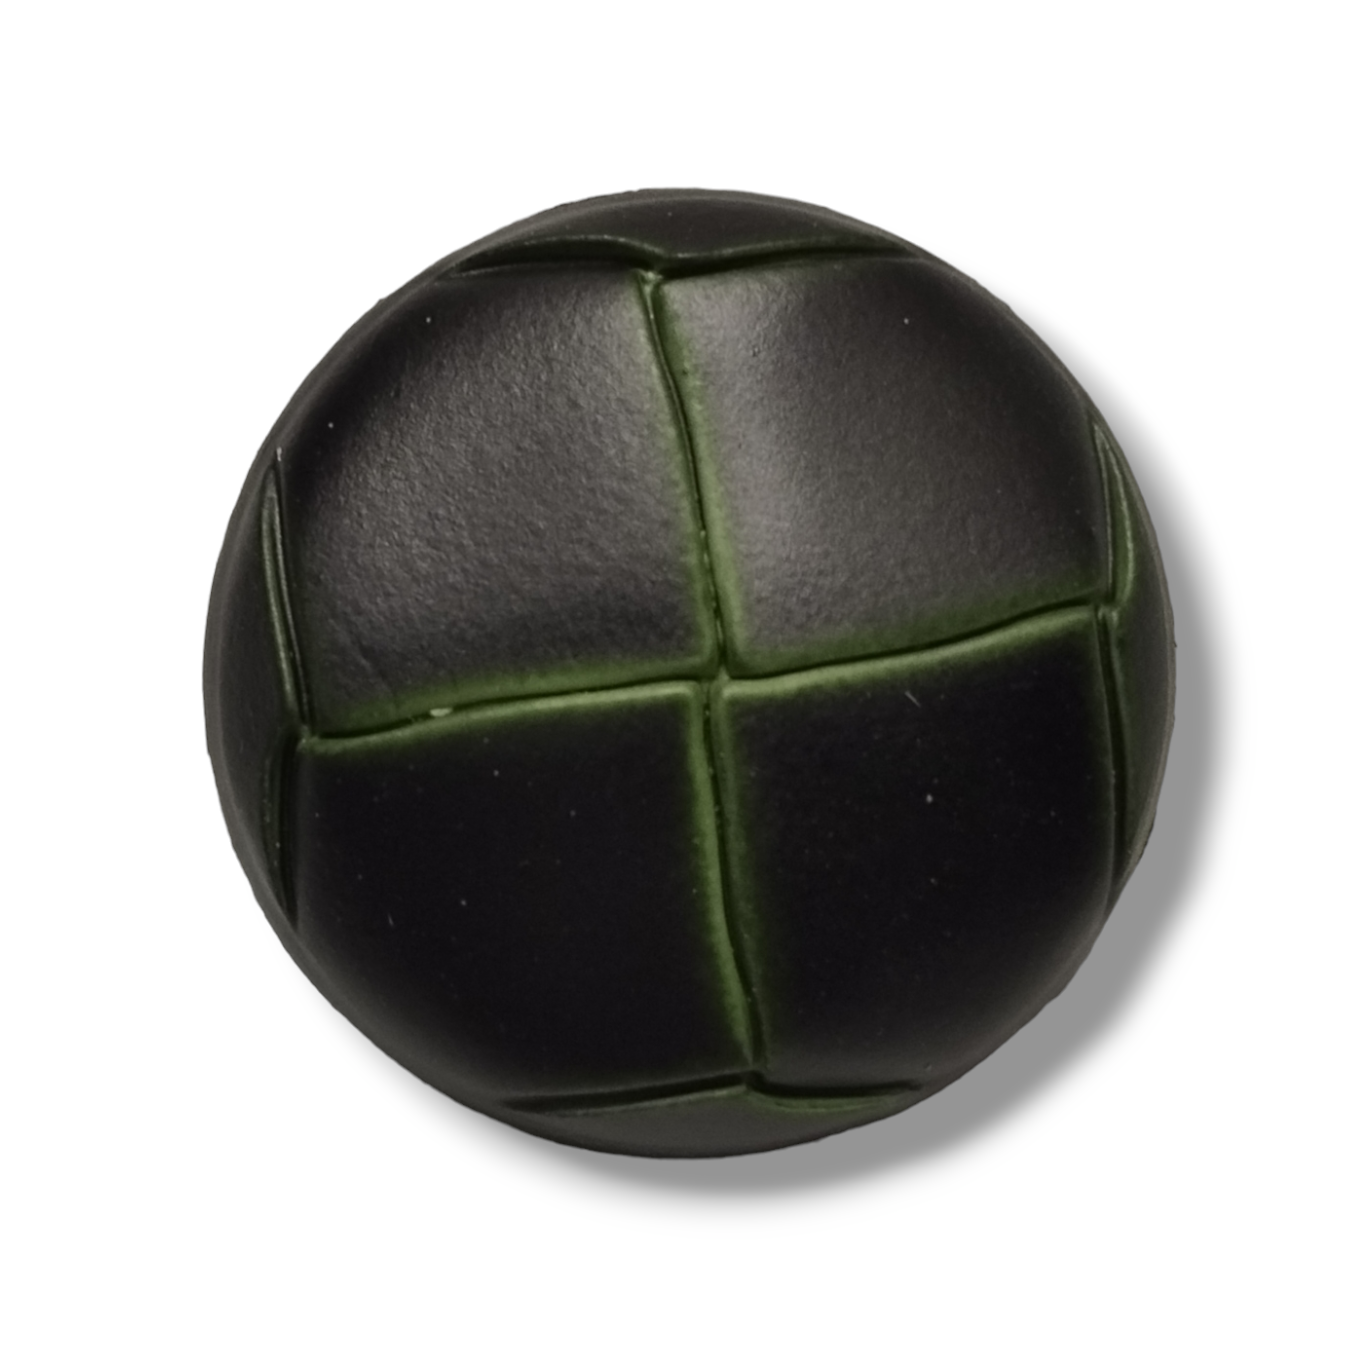 Imitation leather loden button